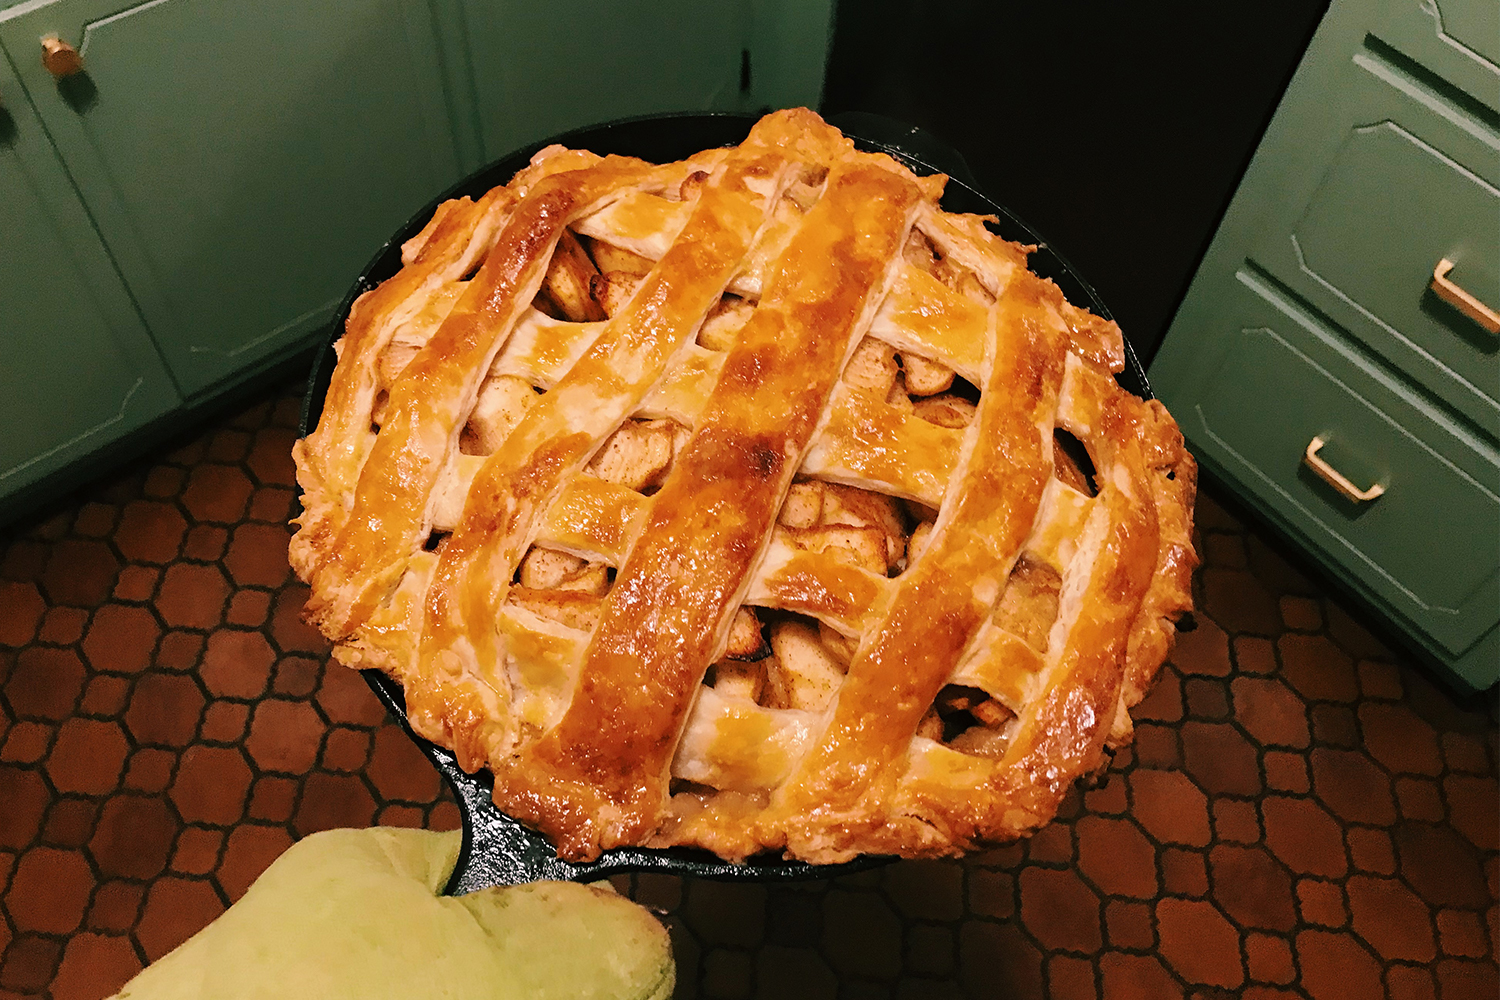 A Field Company No. 8 cast iron skillet holding an apple pie fresh out of the oven, with green cabinets and a geometric floor in the background